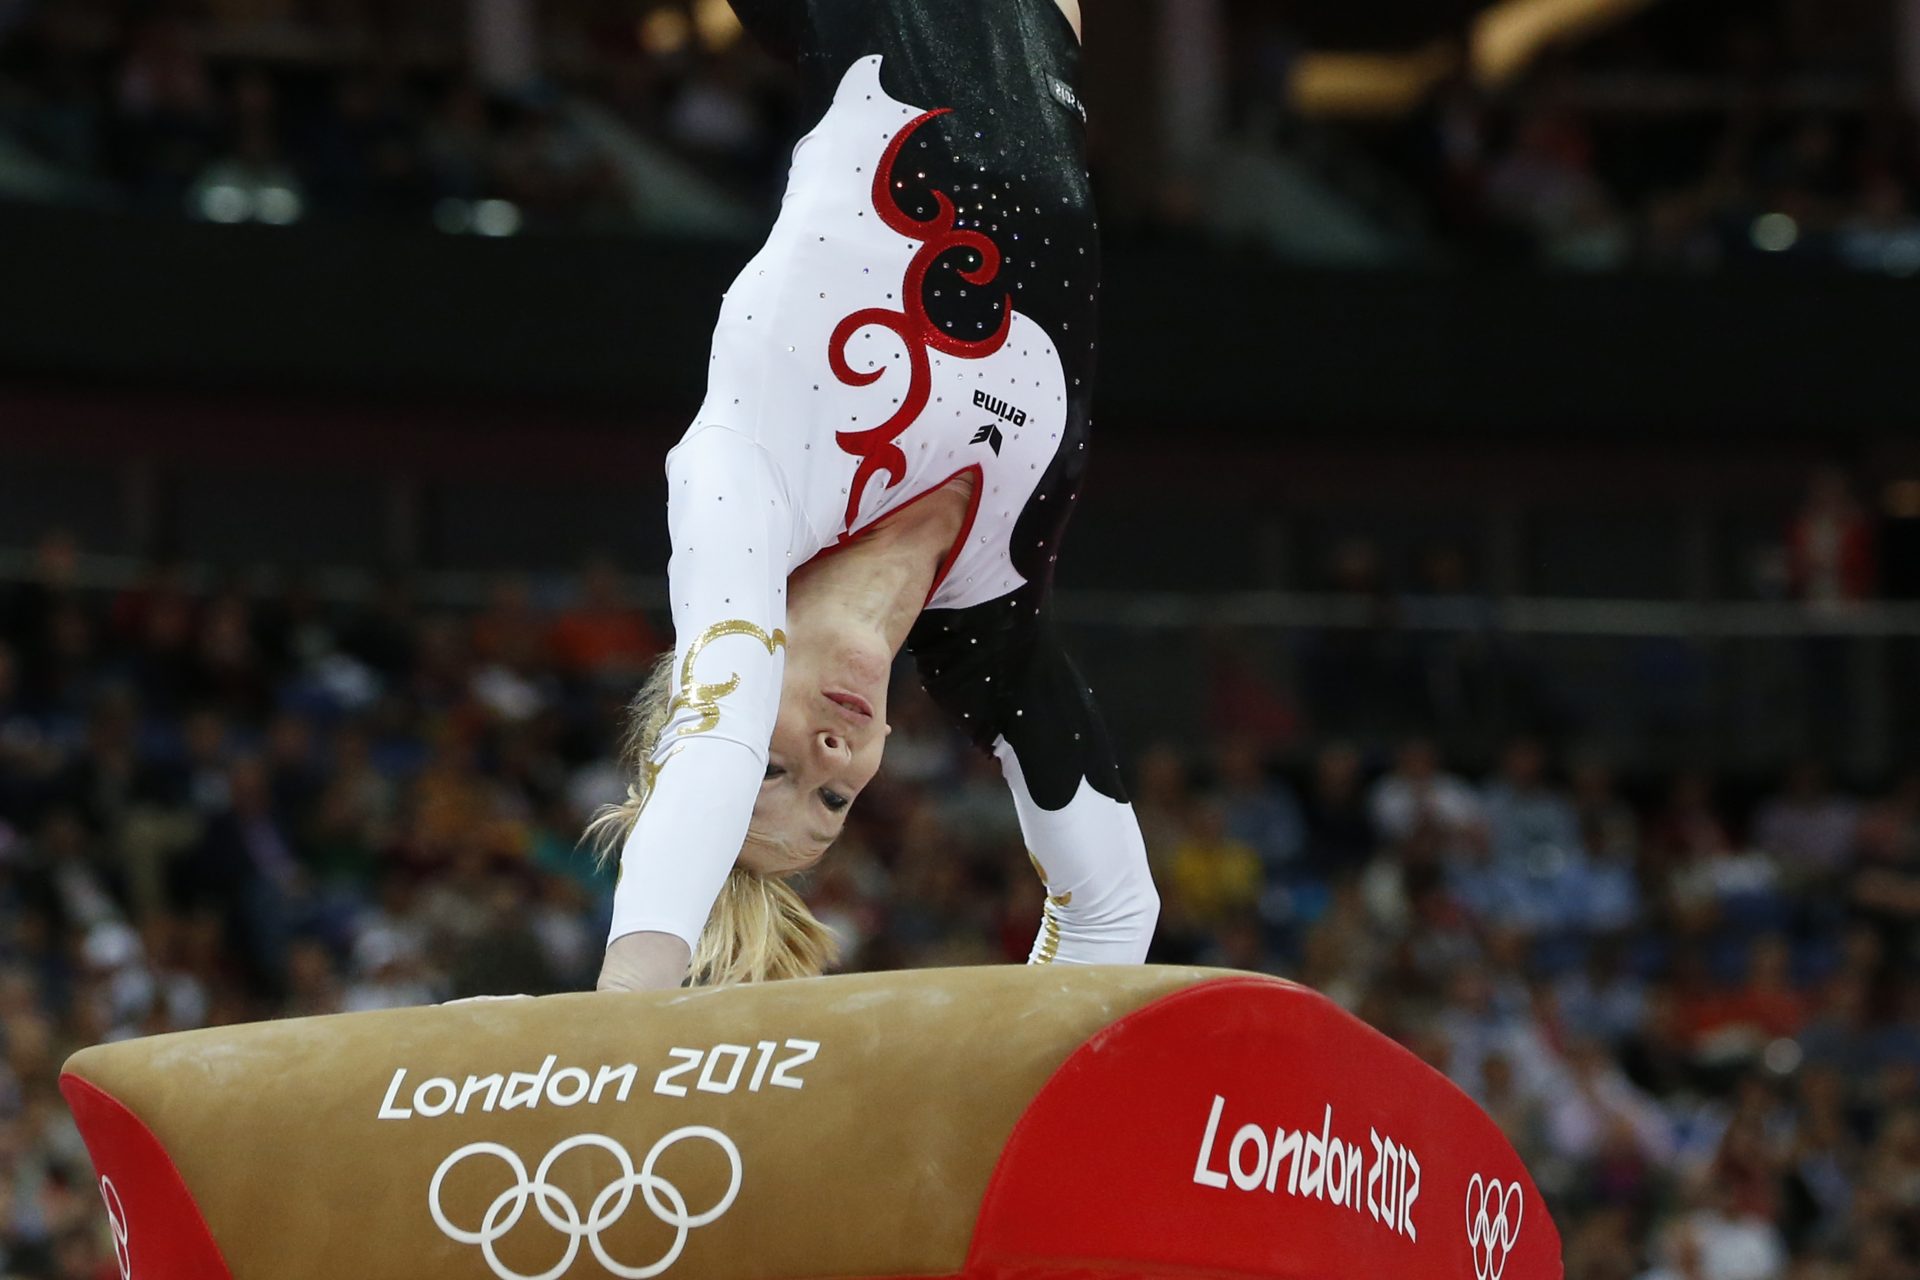 Janine Berger’s Elbow Dislocation (2012 London Games)